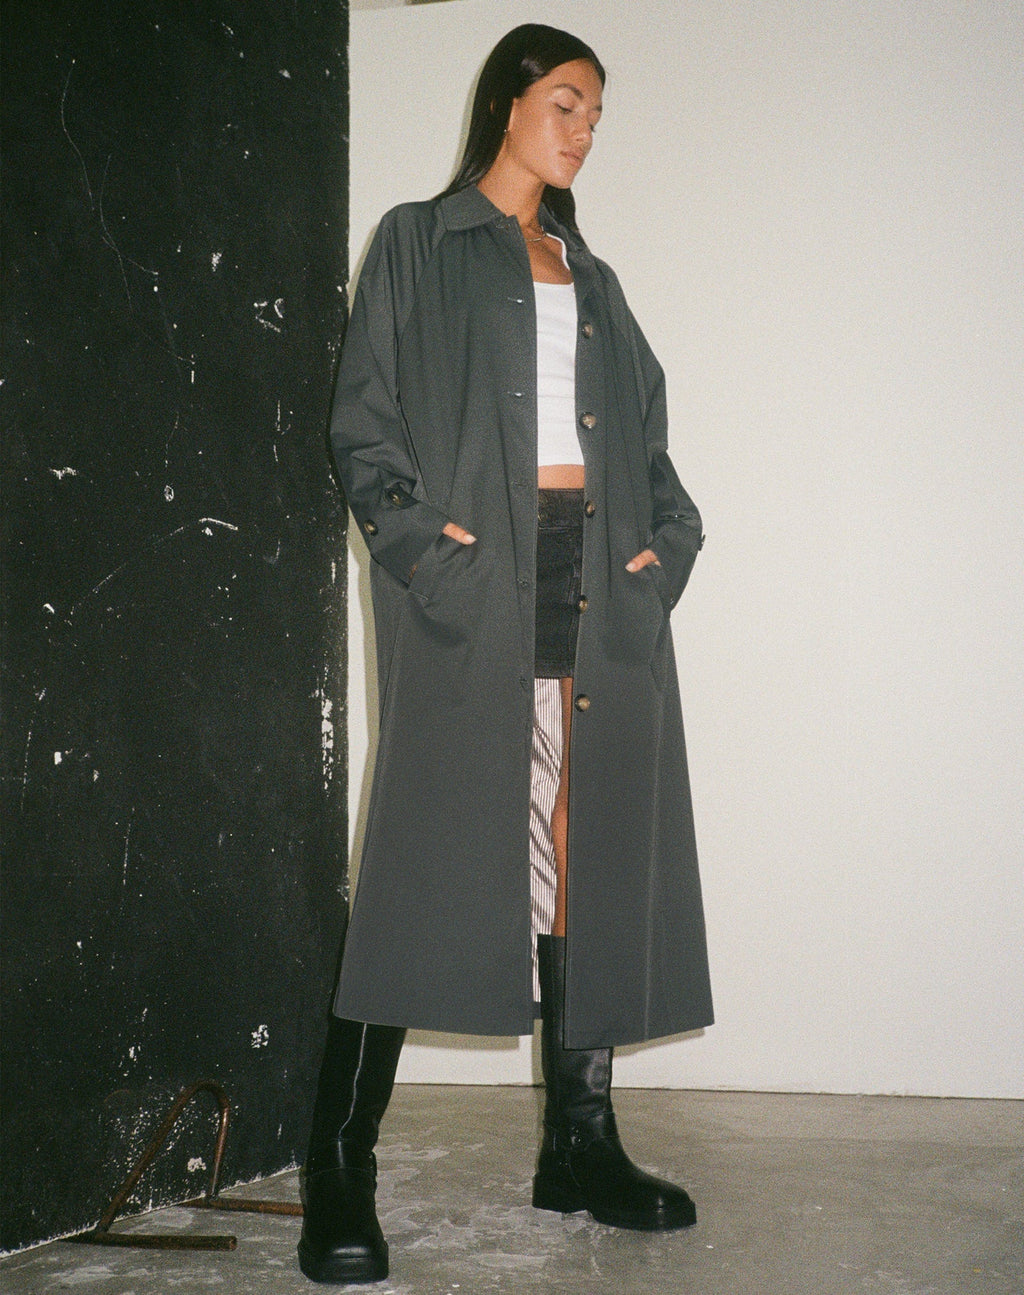 Assa Trench Coat in Light Charcoal with Stripe Lining